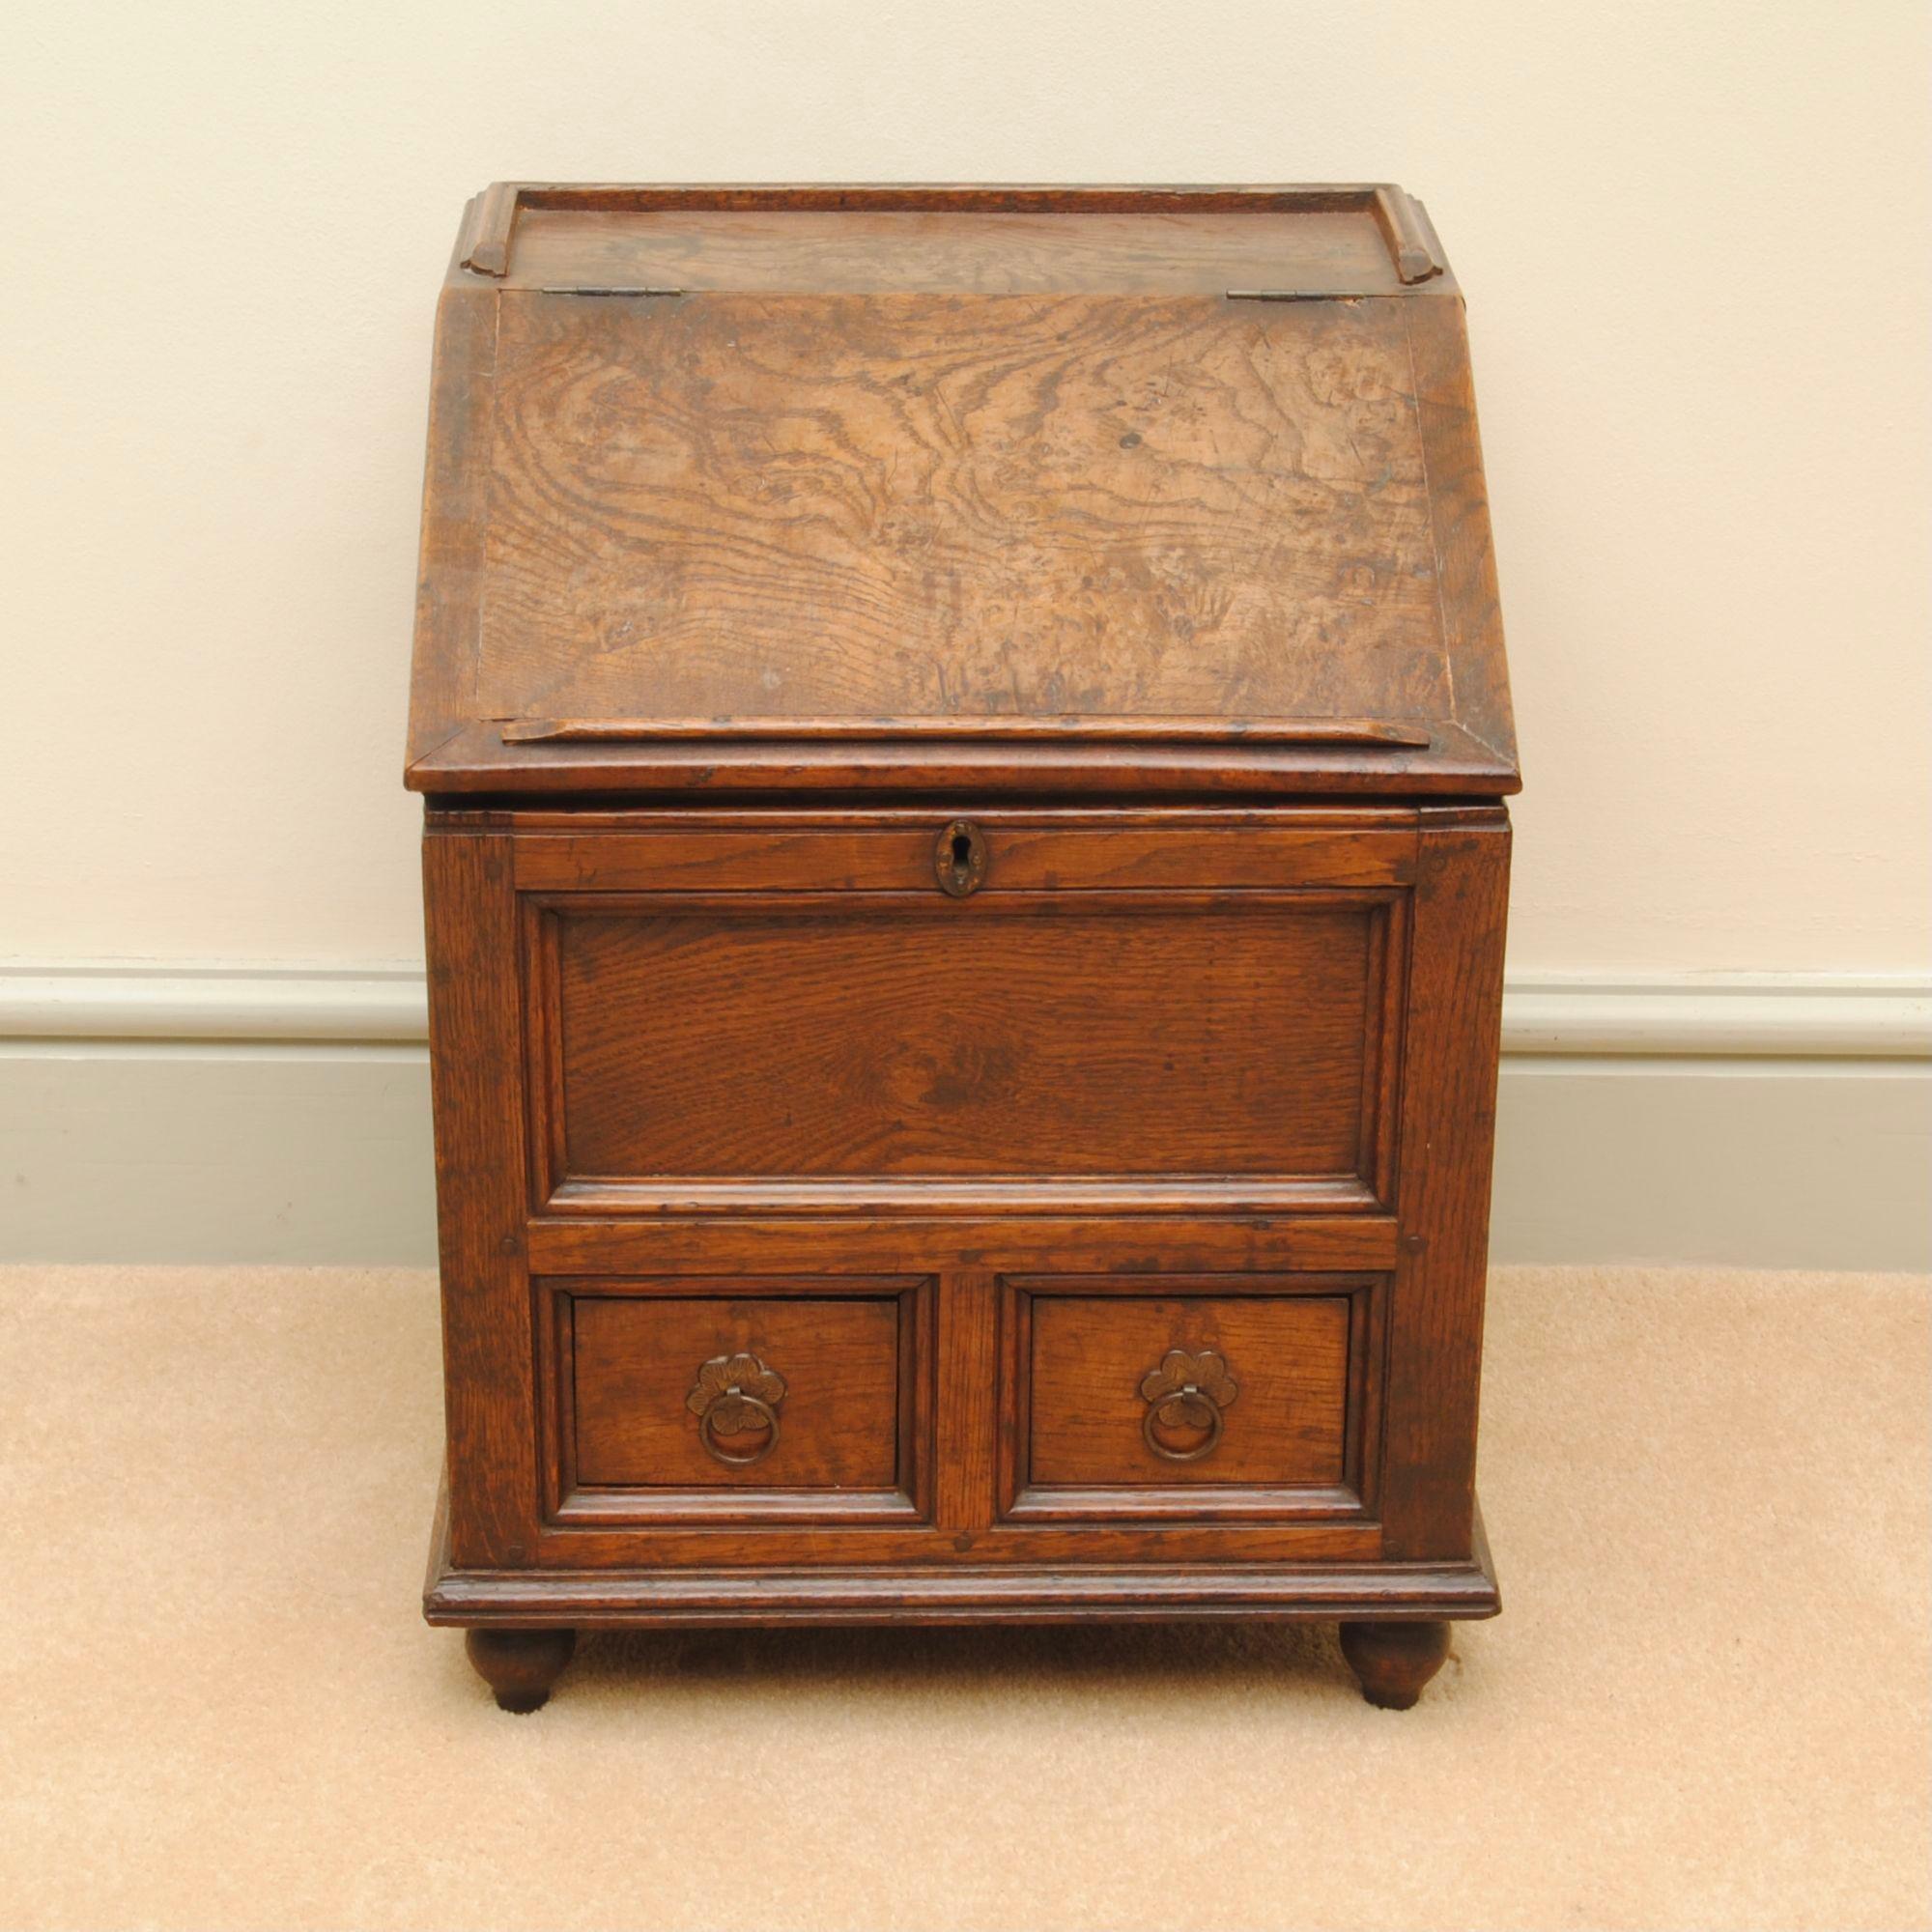 A super early 18th-century childs writing desk, the slope top lifts to reveal a fitted drawer; of lovely colour and patina.